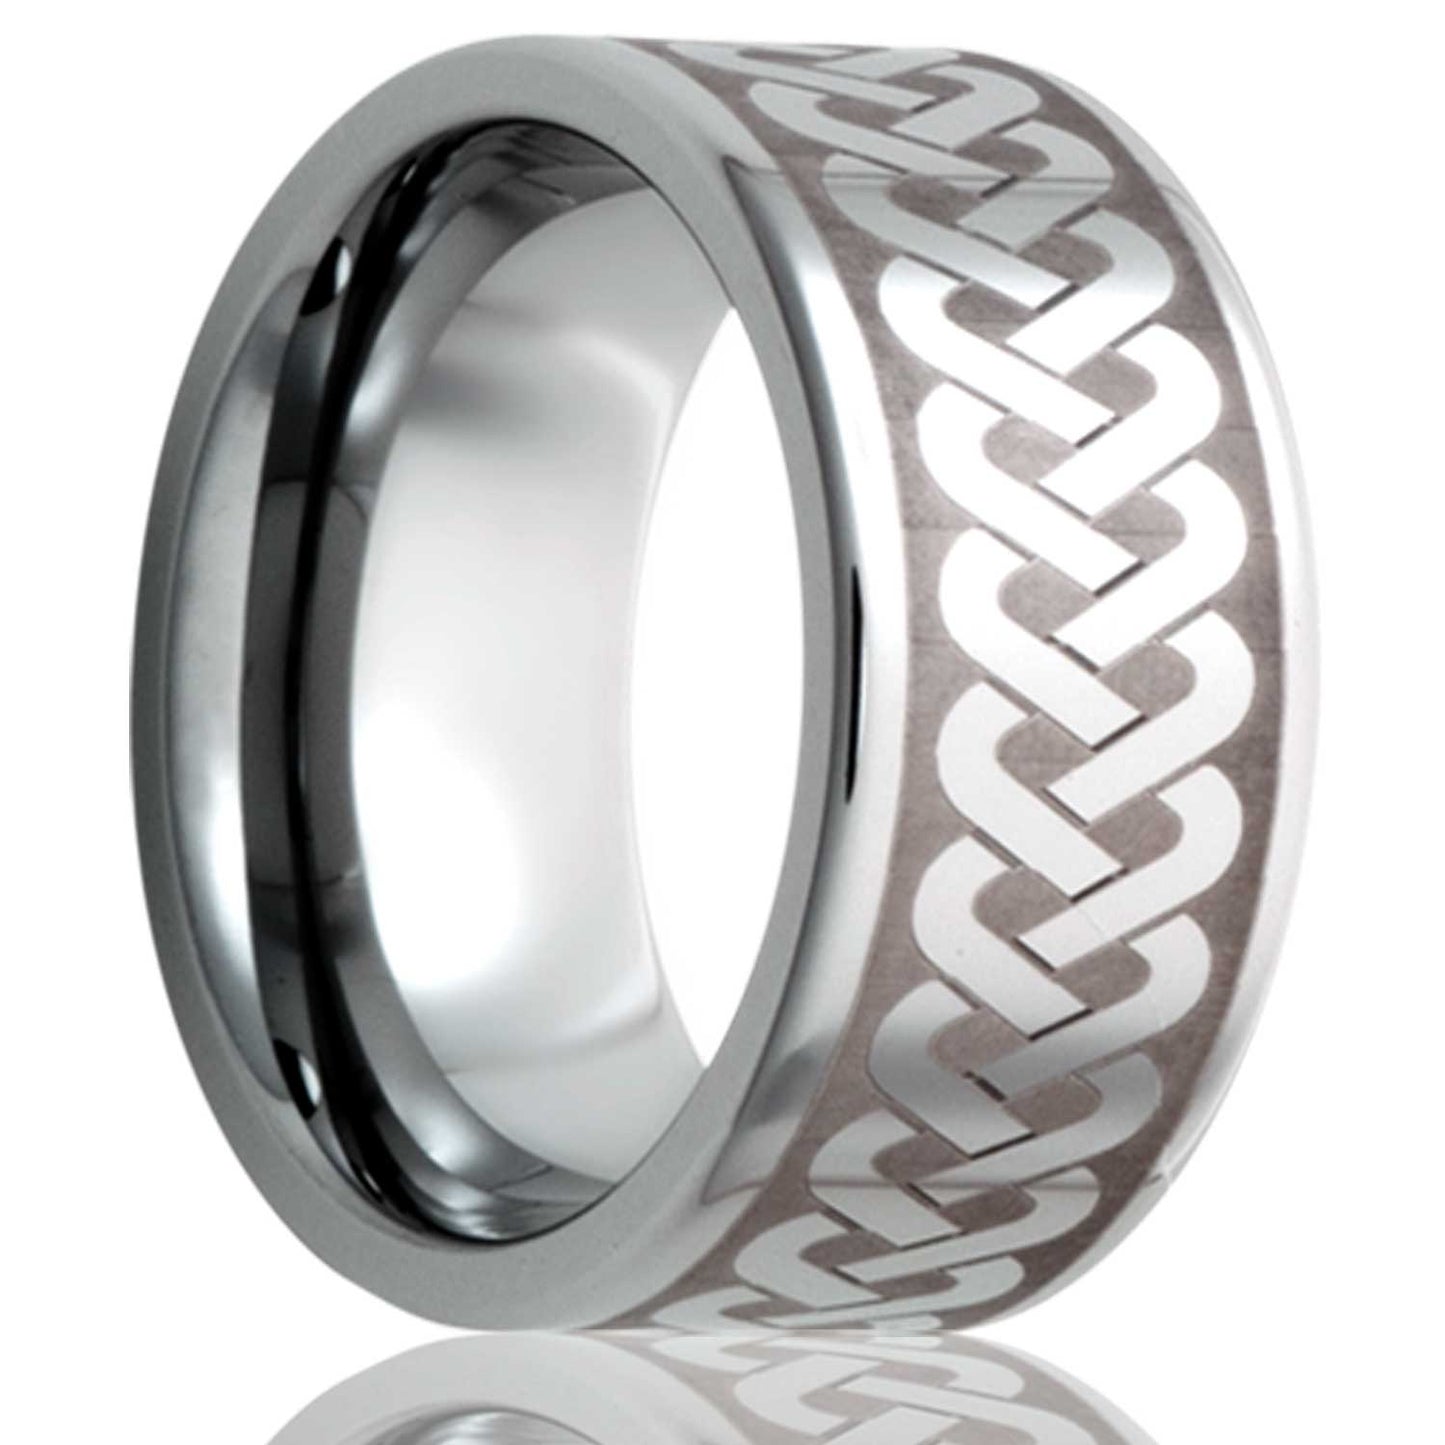 A sailor's celtic knot tungsten wedding band displayed on a neutral white background.